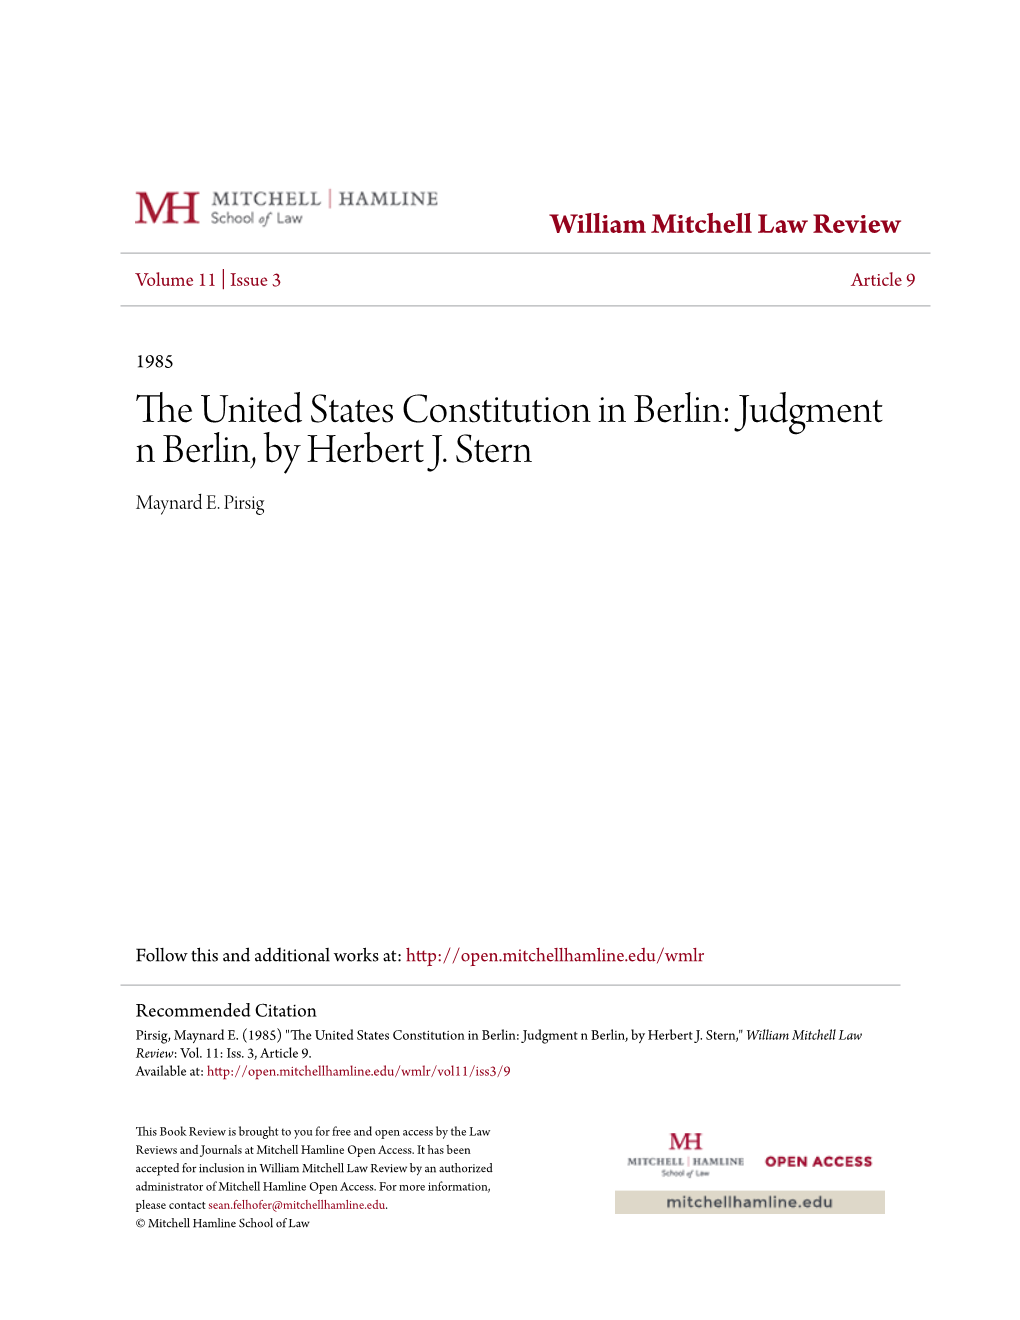 The United States Constitution in Berlin: Judgment N Berlin, by Herbert J. Stern